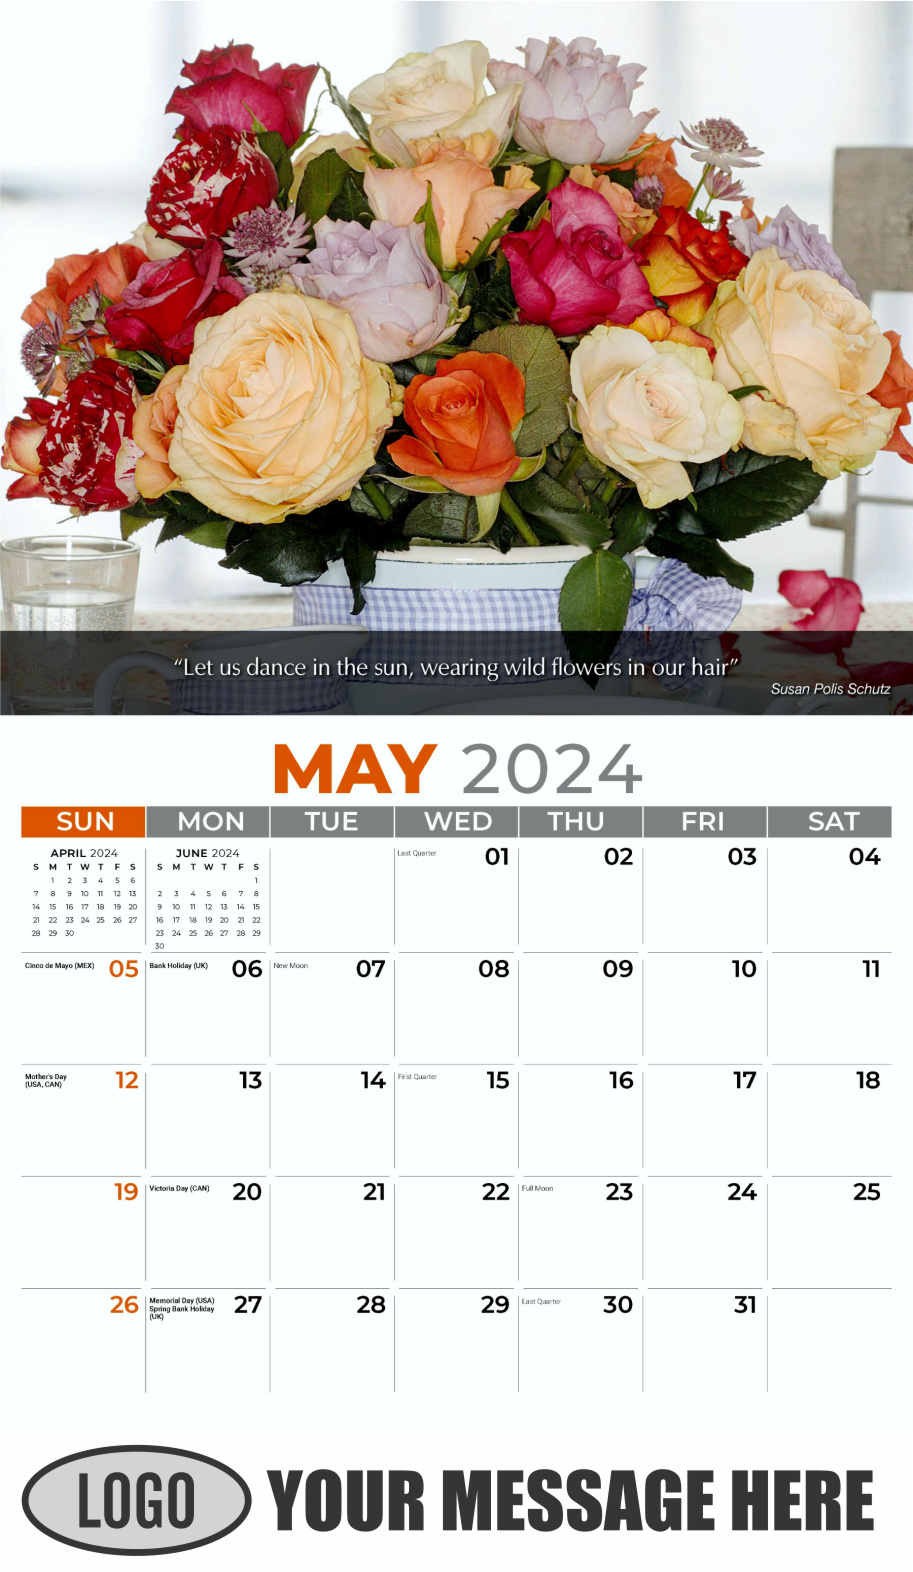 Flowers and Gardens 2024 Business Advertising Calendar - May